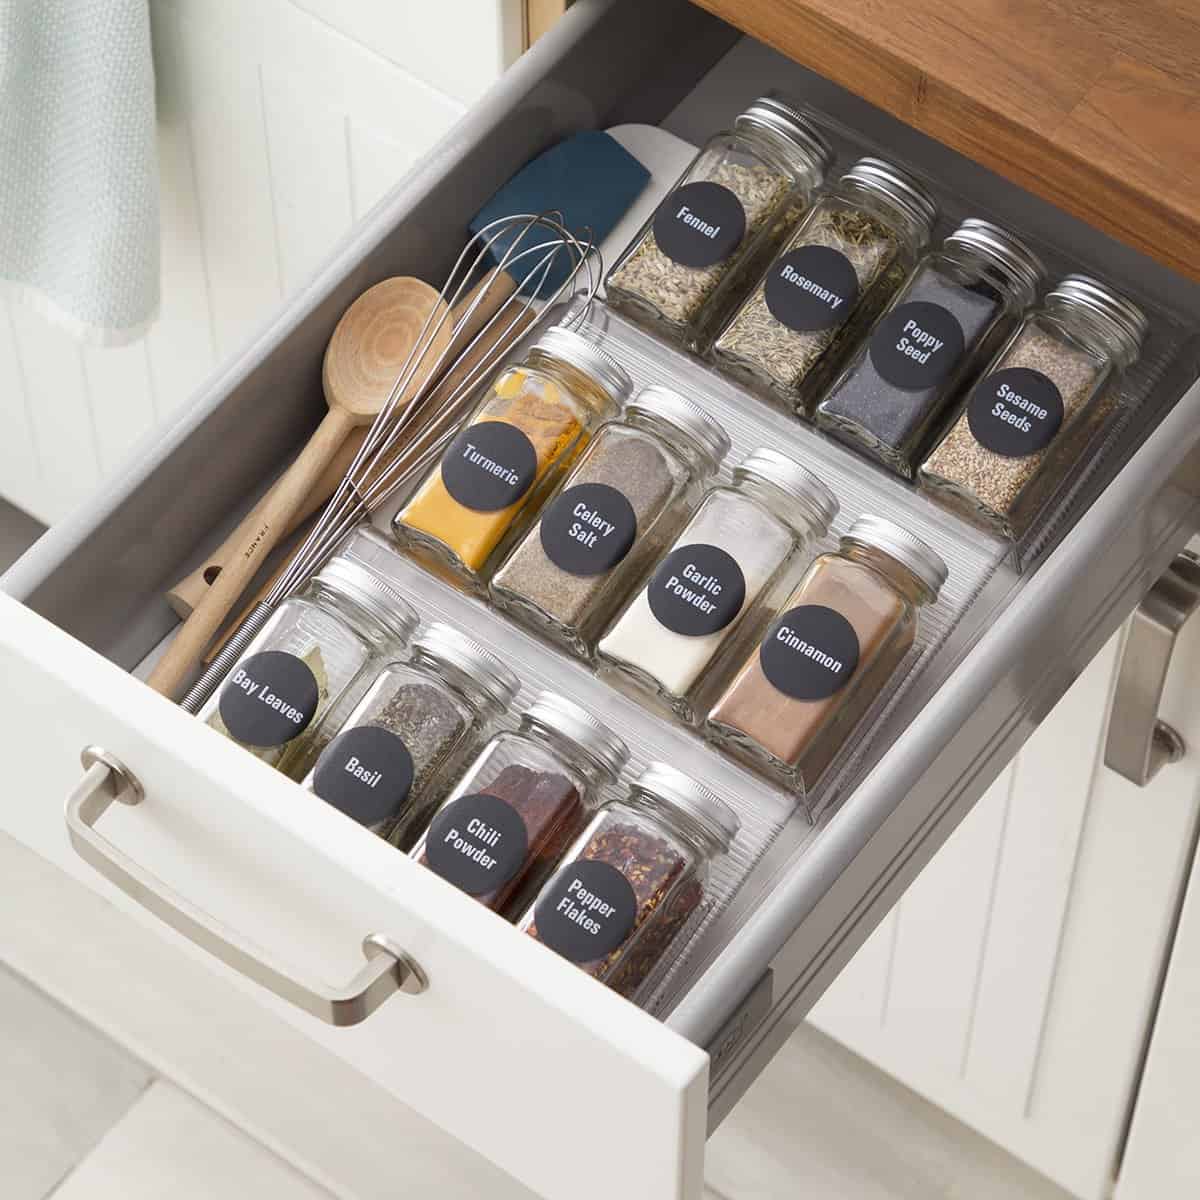 Keep spices in drawers